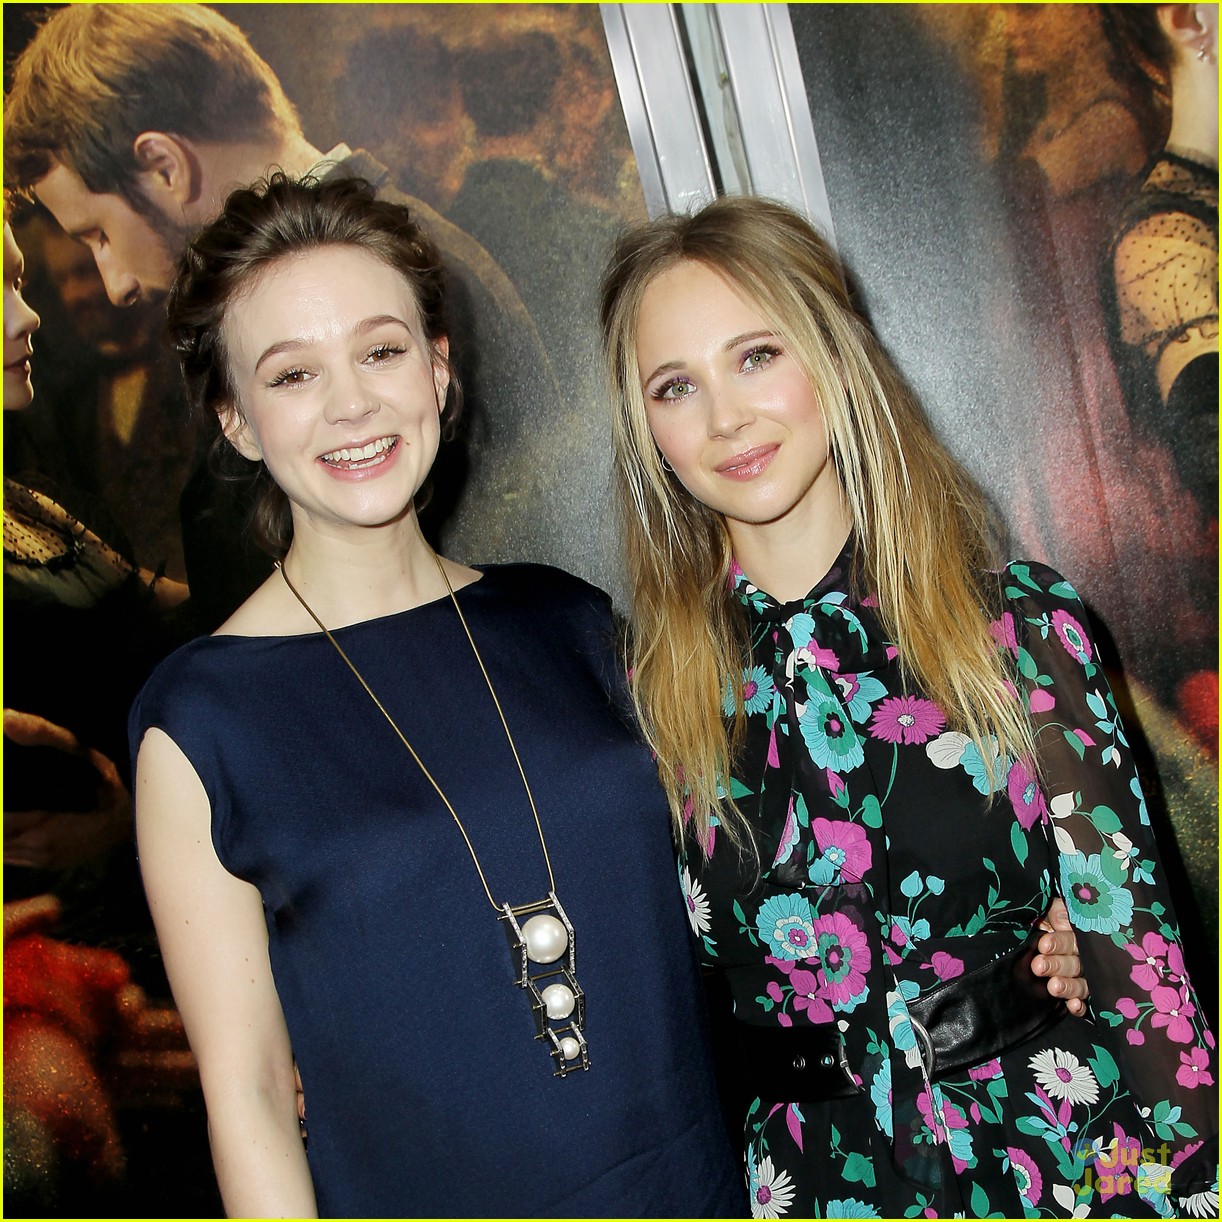 juno temple far from madding crowd nyc 24